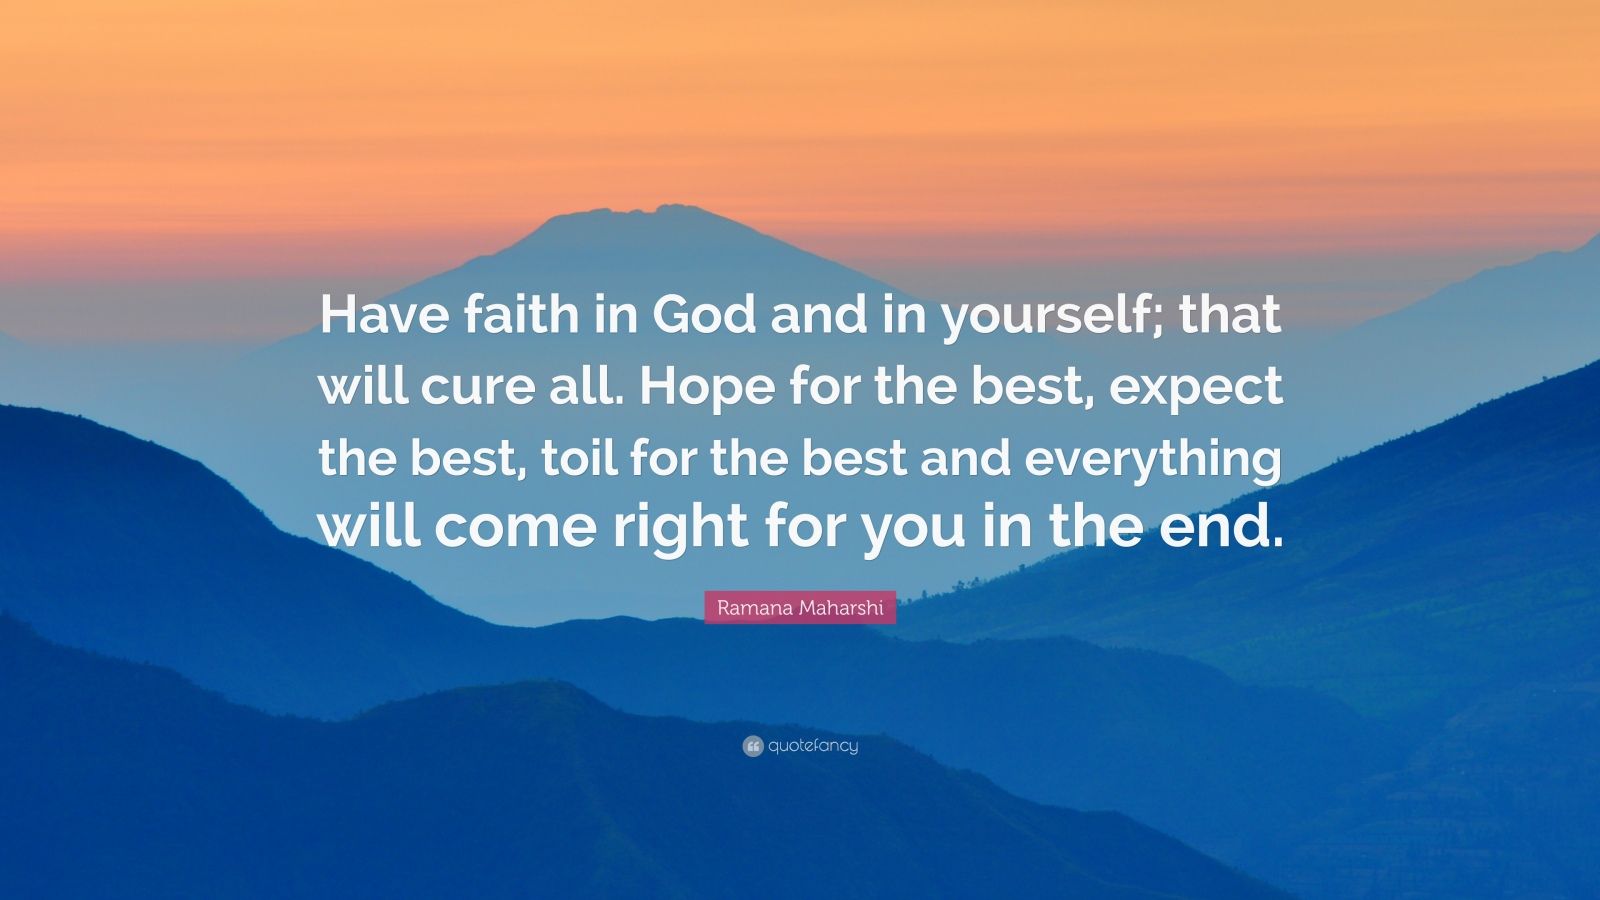 Ramana Maharshi Quote: “Have faith in God and in yourself; that will ...